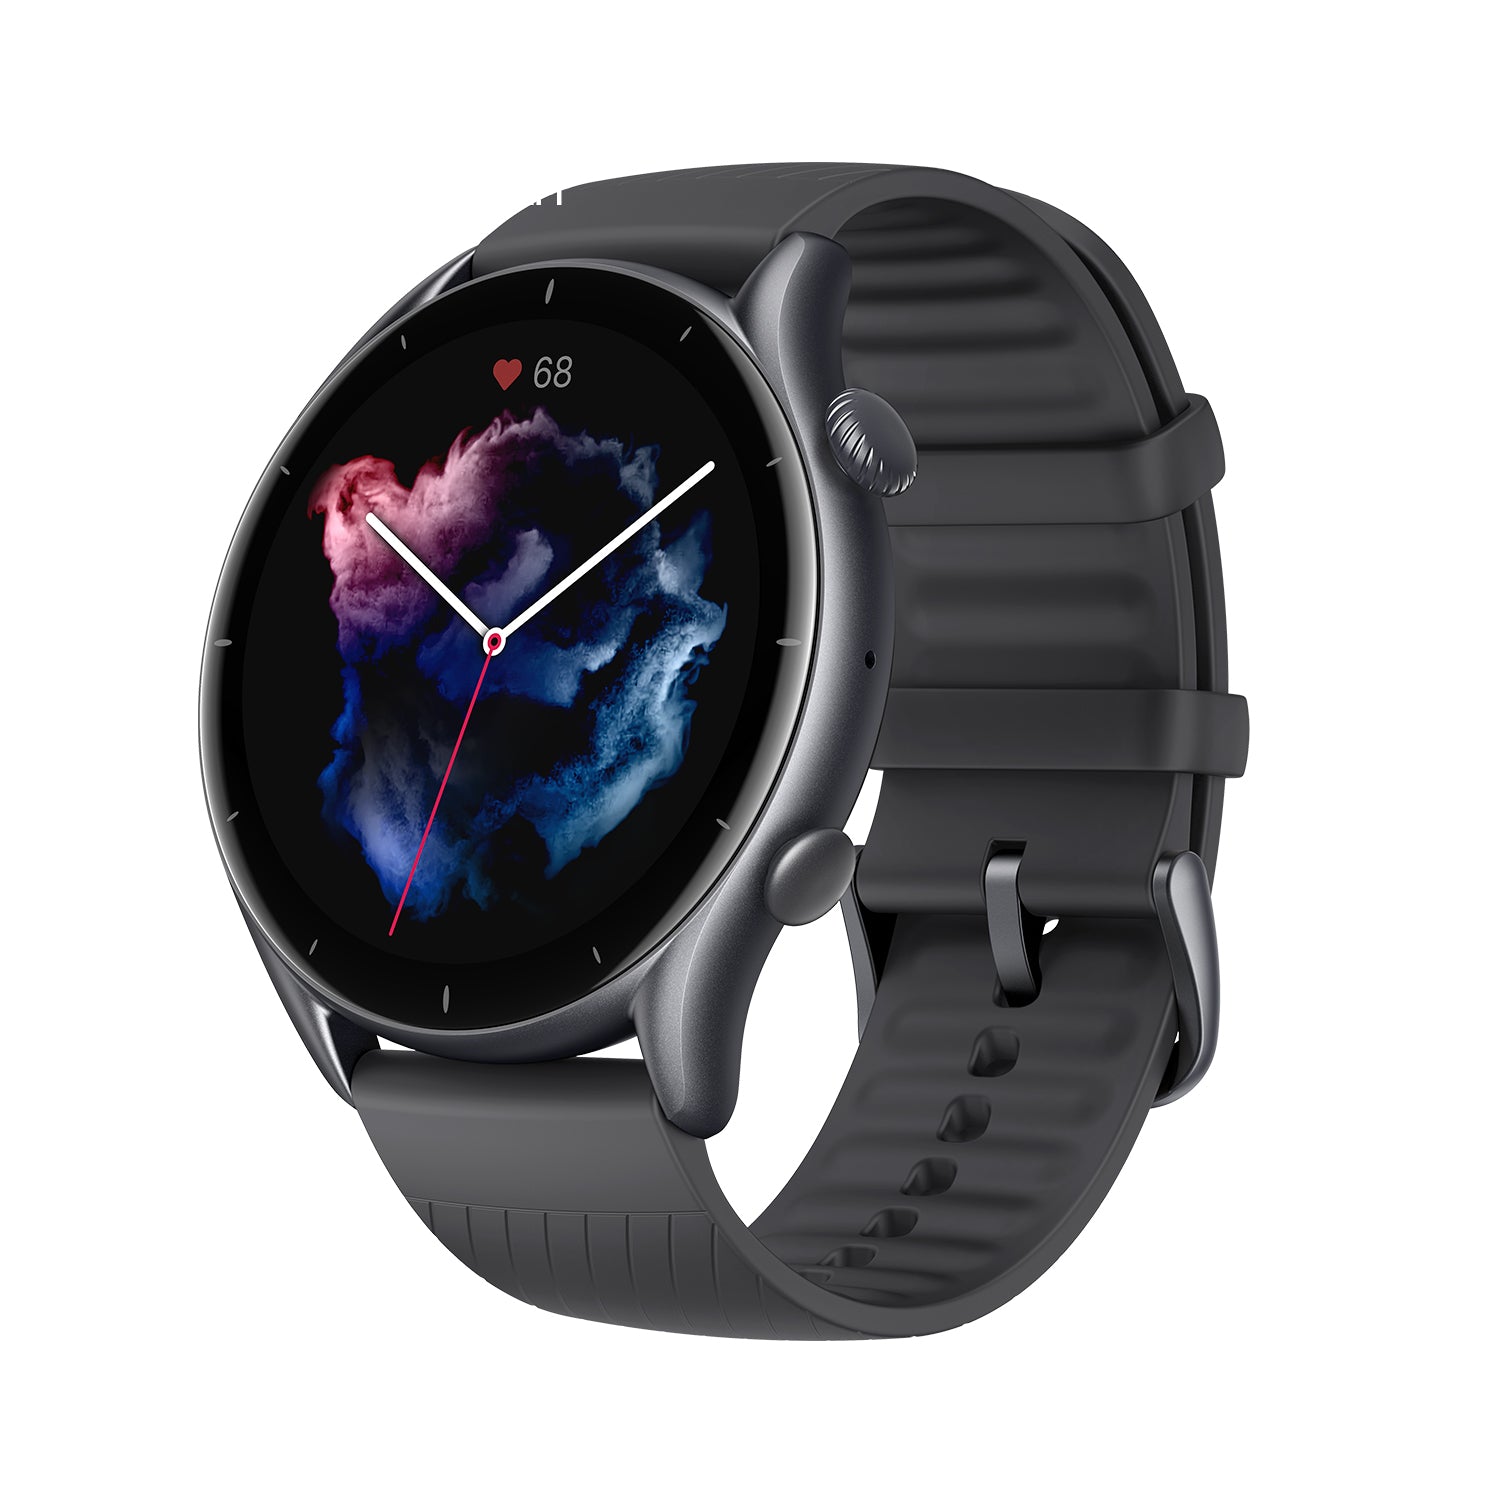 Amazfit GTR 3 Pro health smartwatch features a 12-day battery life and 150+  sports modes » Gadget Flow